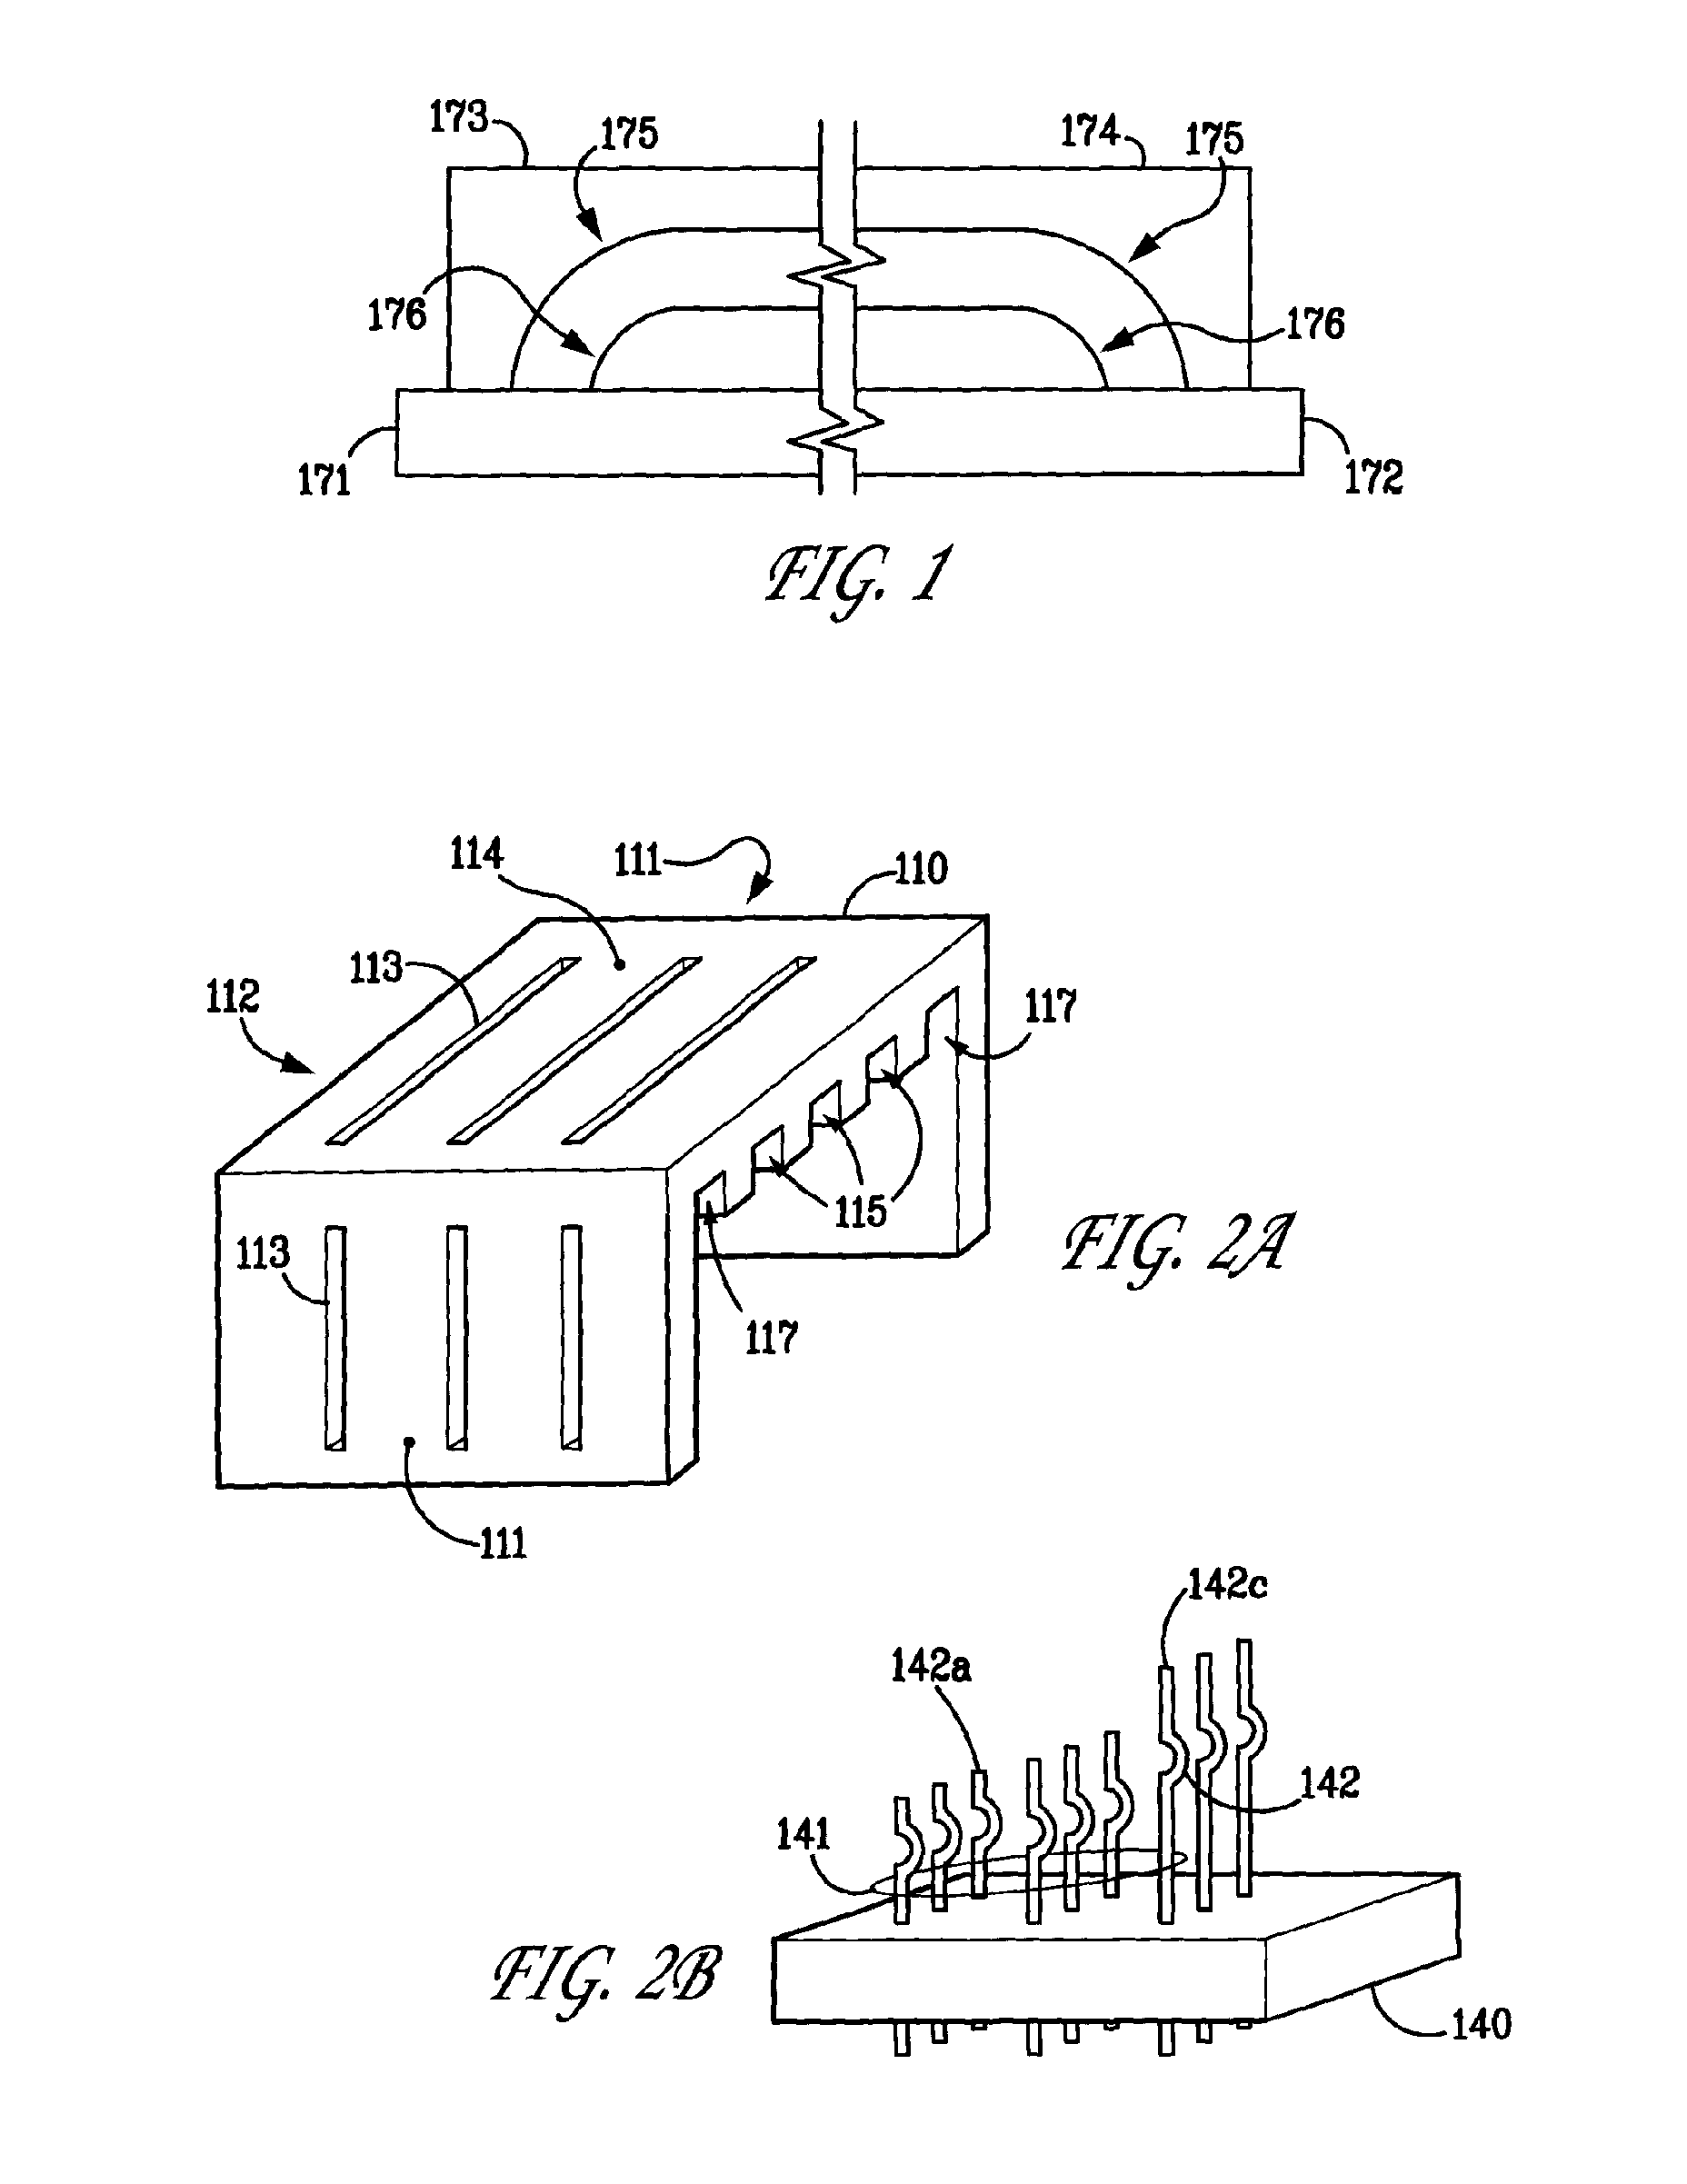 High speed connectors that minimize signal skew and crosstalk